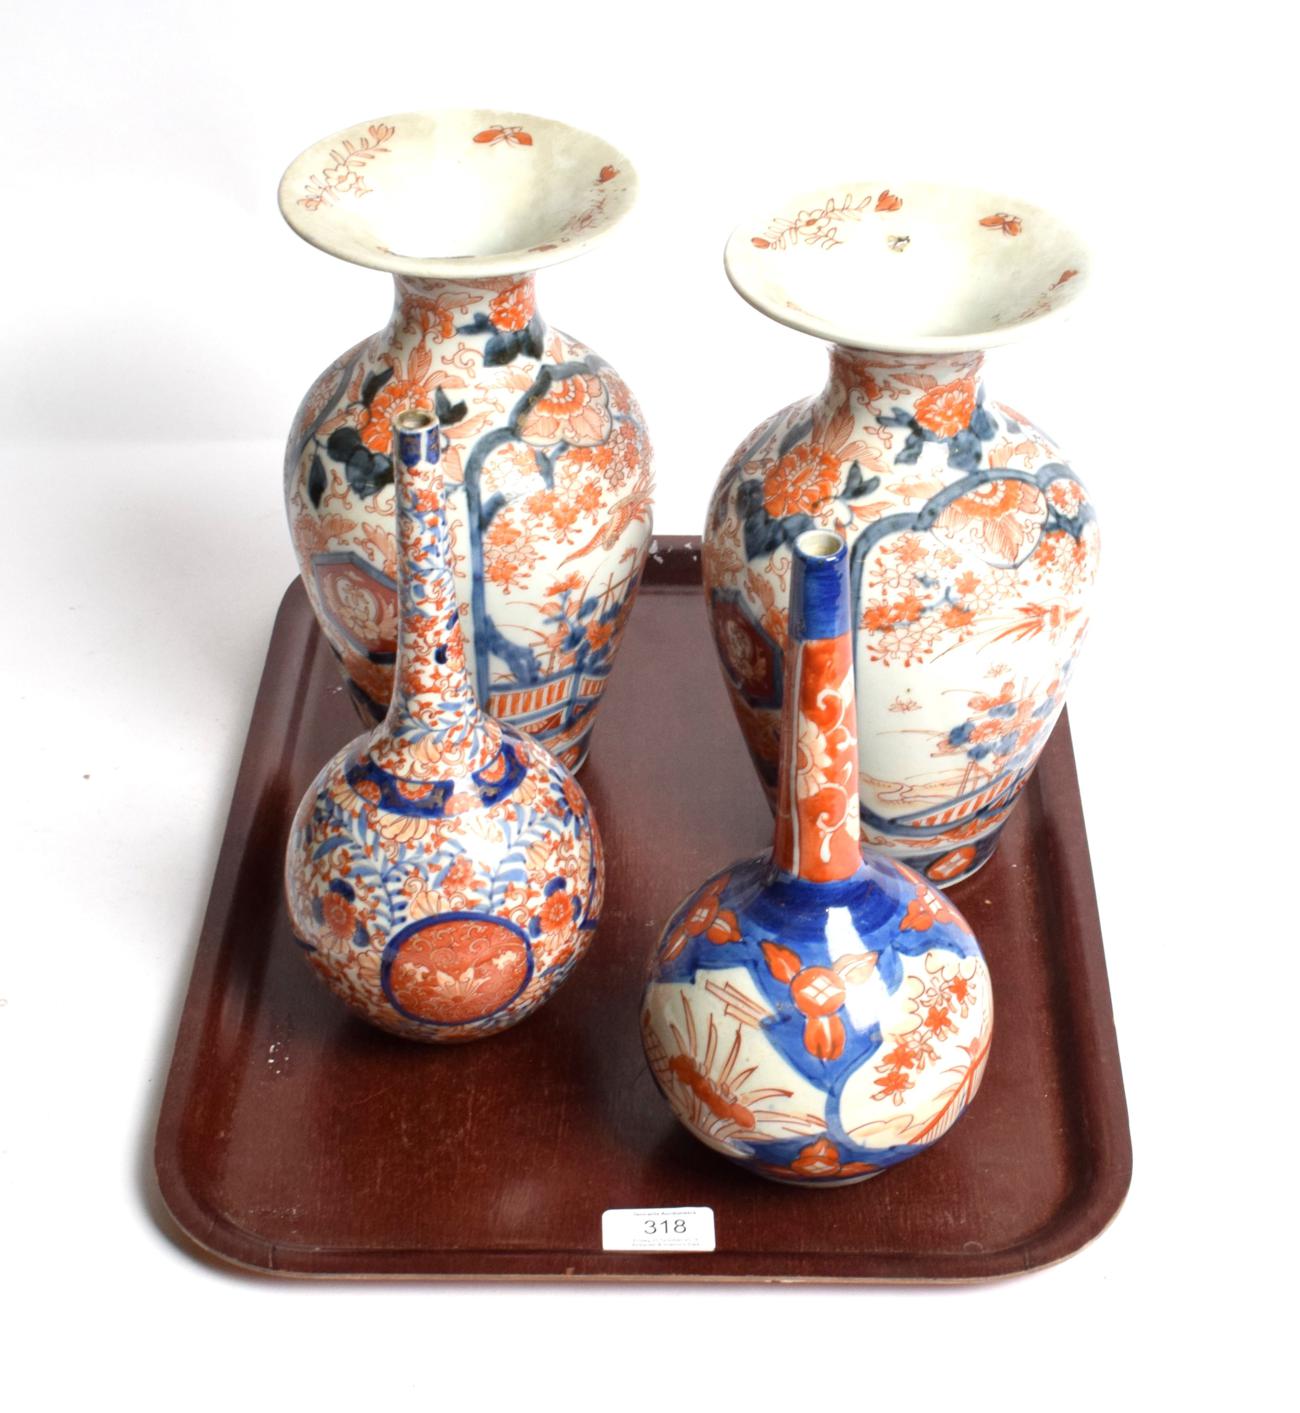 Lot 318 - A pair of Japanese Imari baluster vases, 19th century, everted rims; with two bottle vases (4)